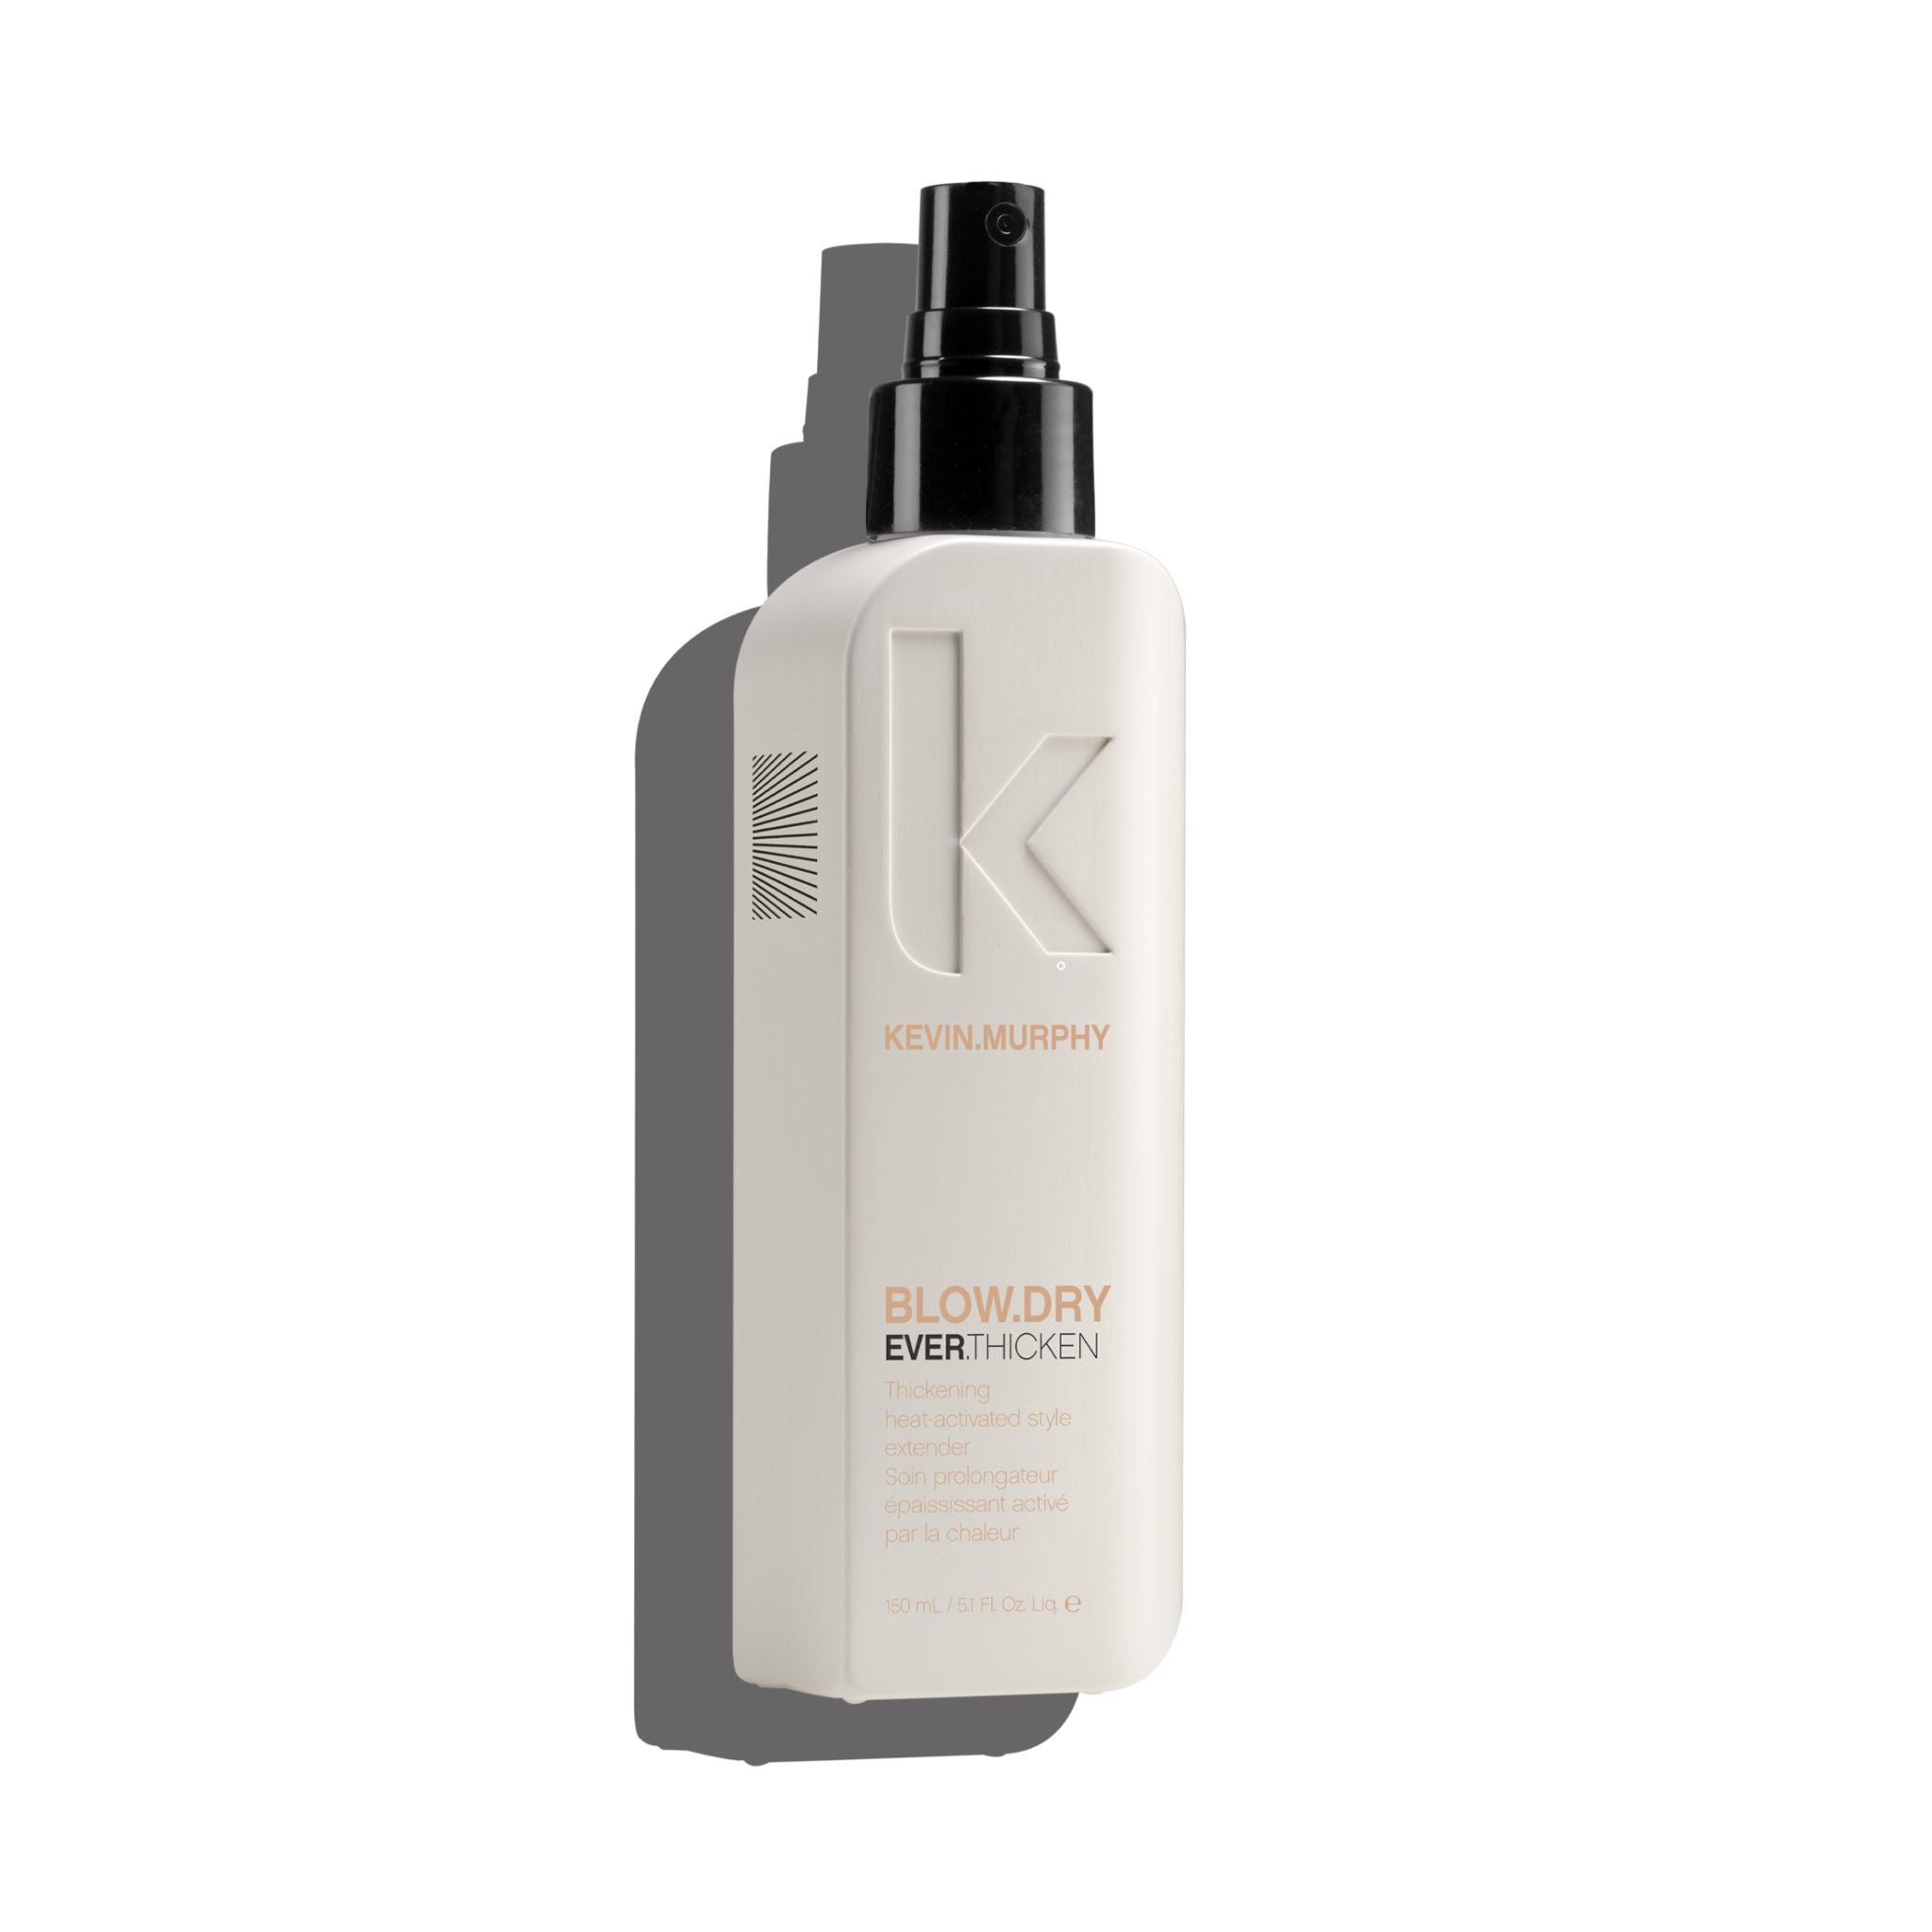 Kevin Murphy - Ever Thicken 150ml